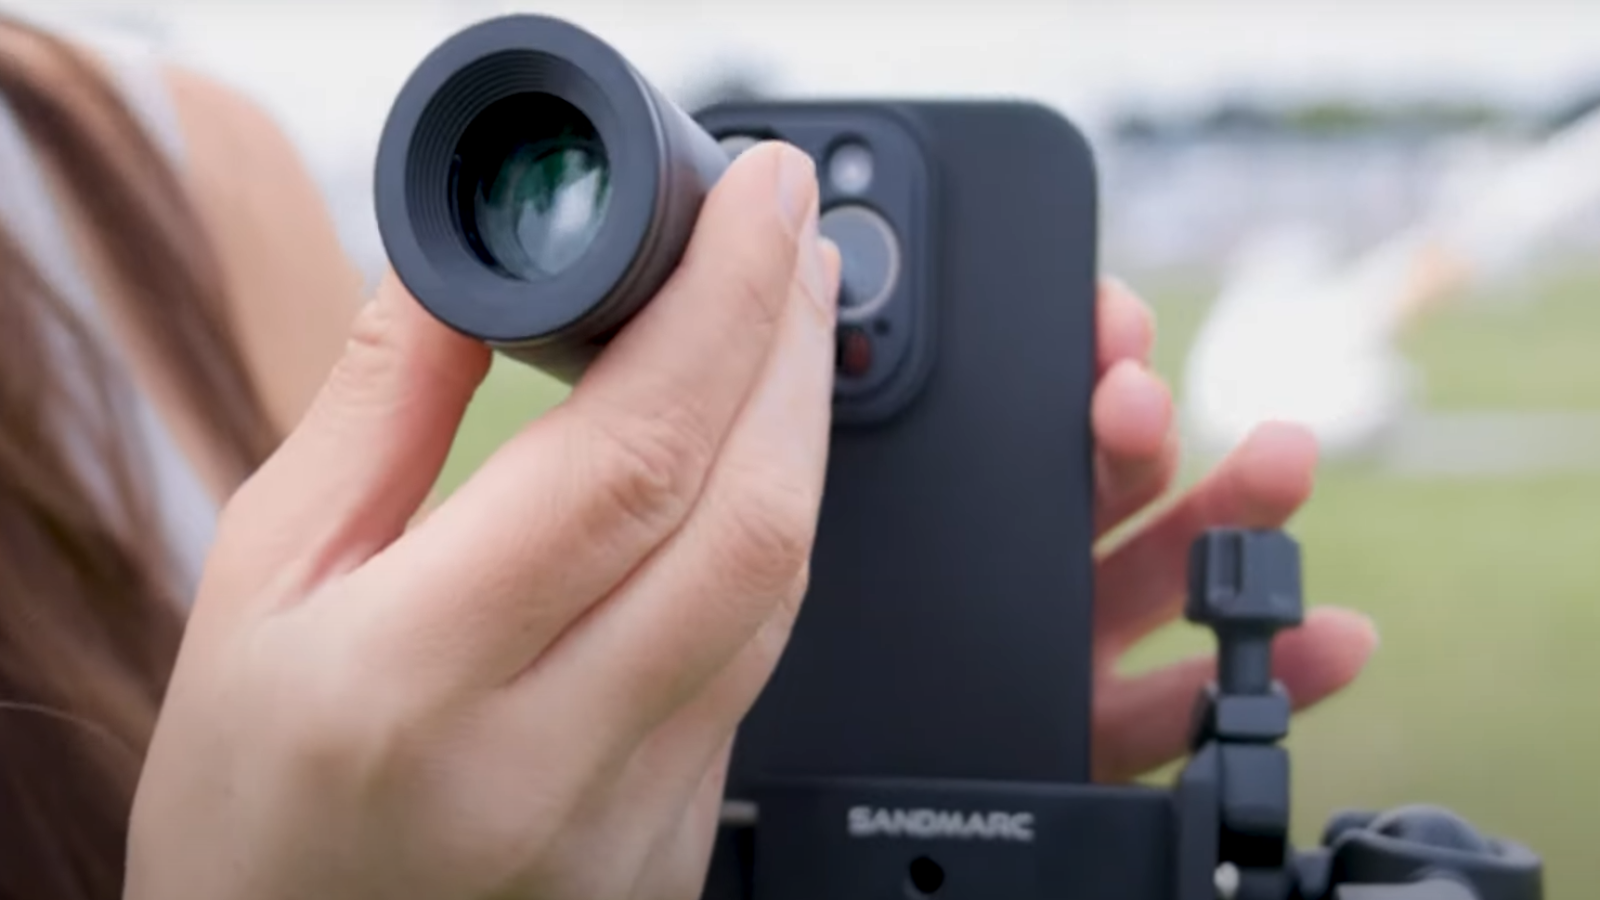 How to turn your iPhone into a super camera